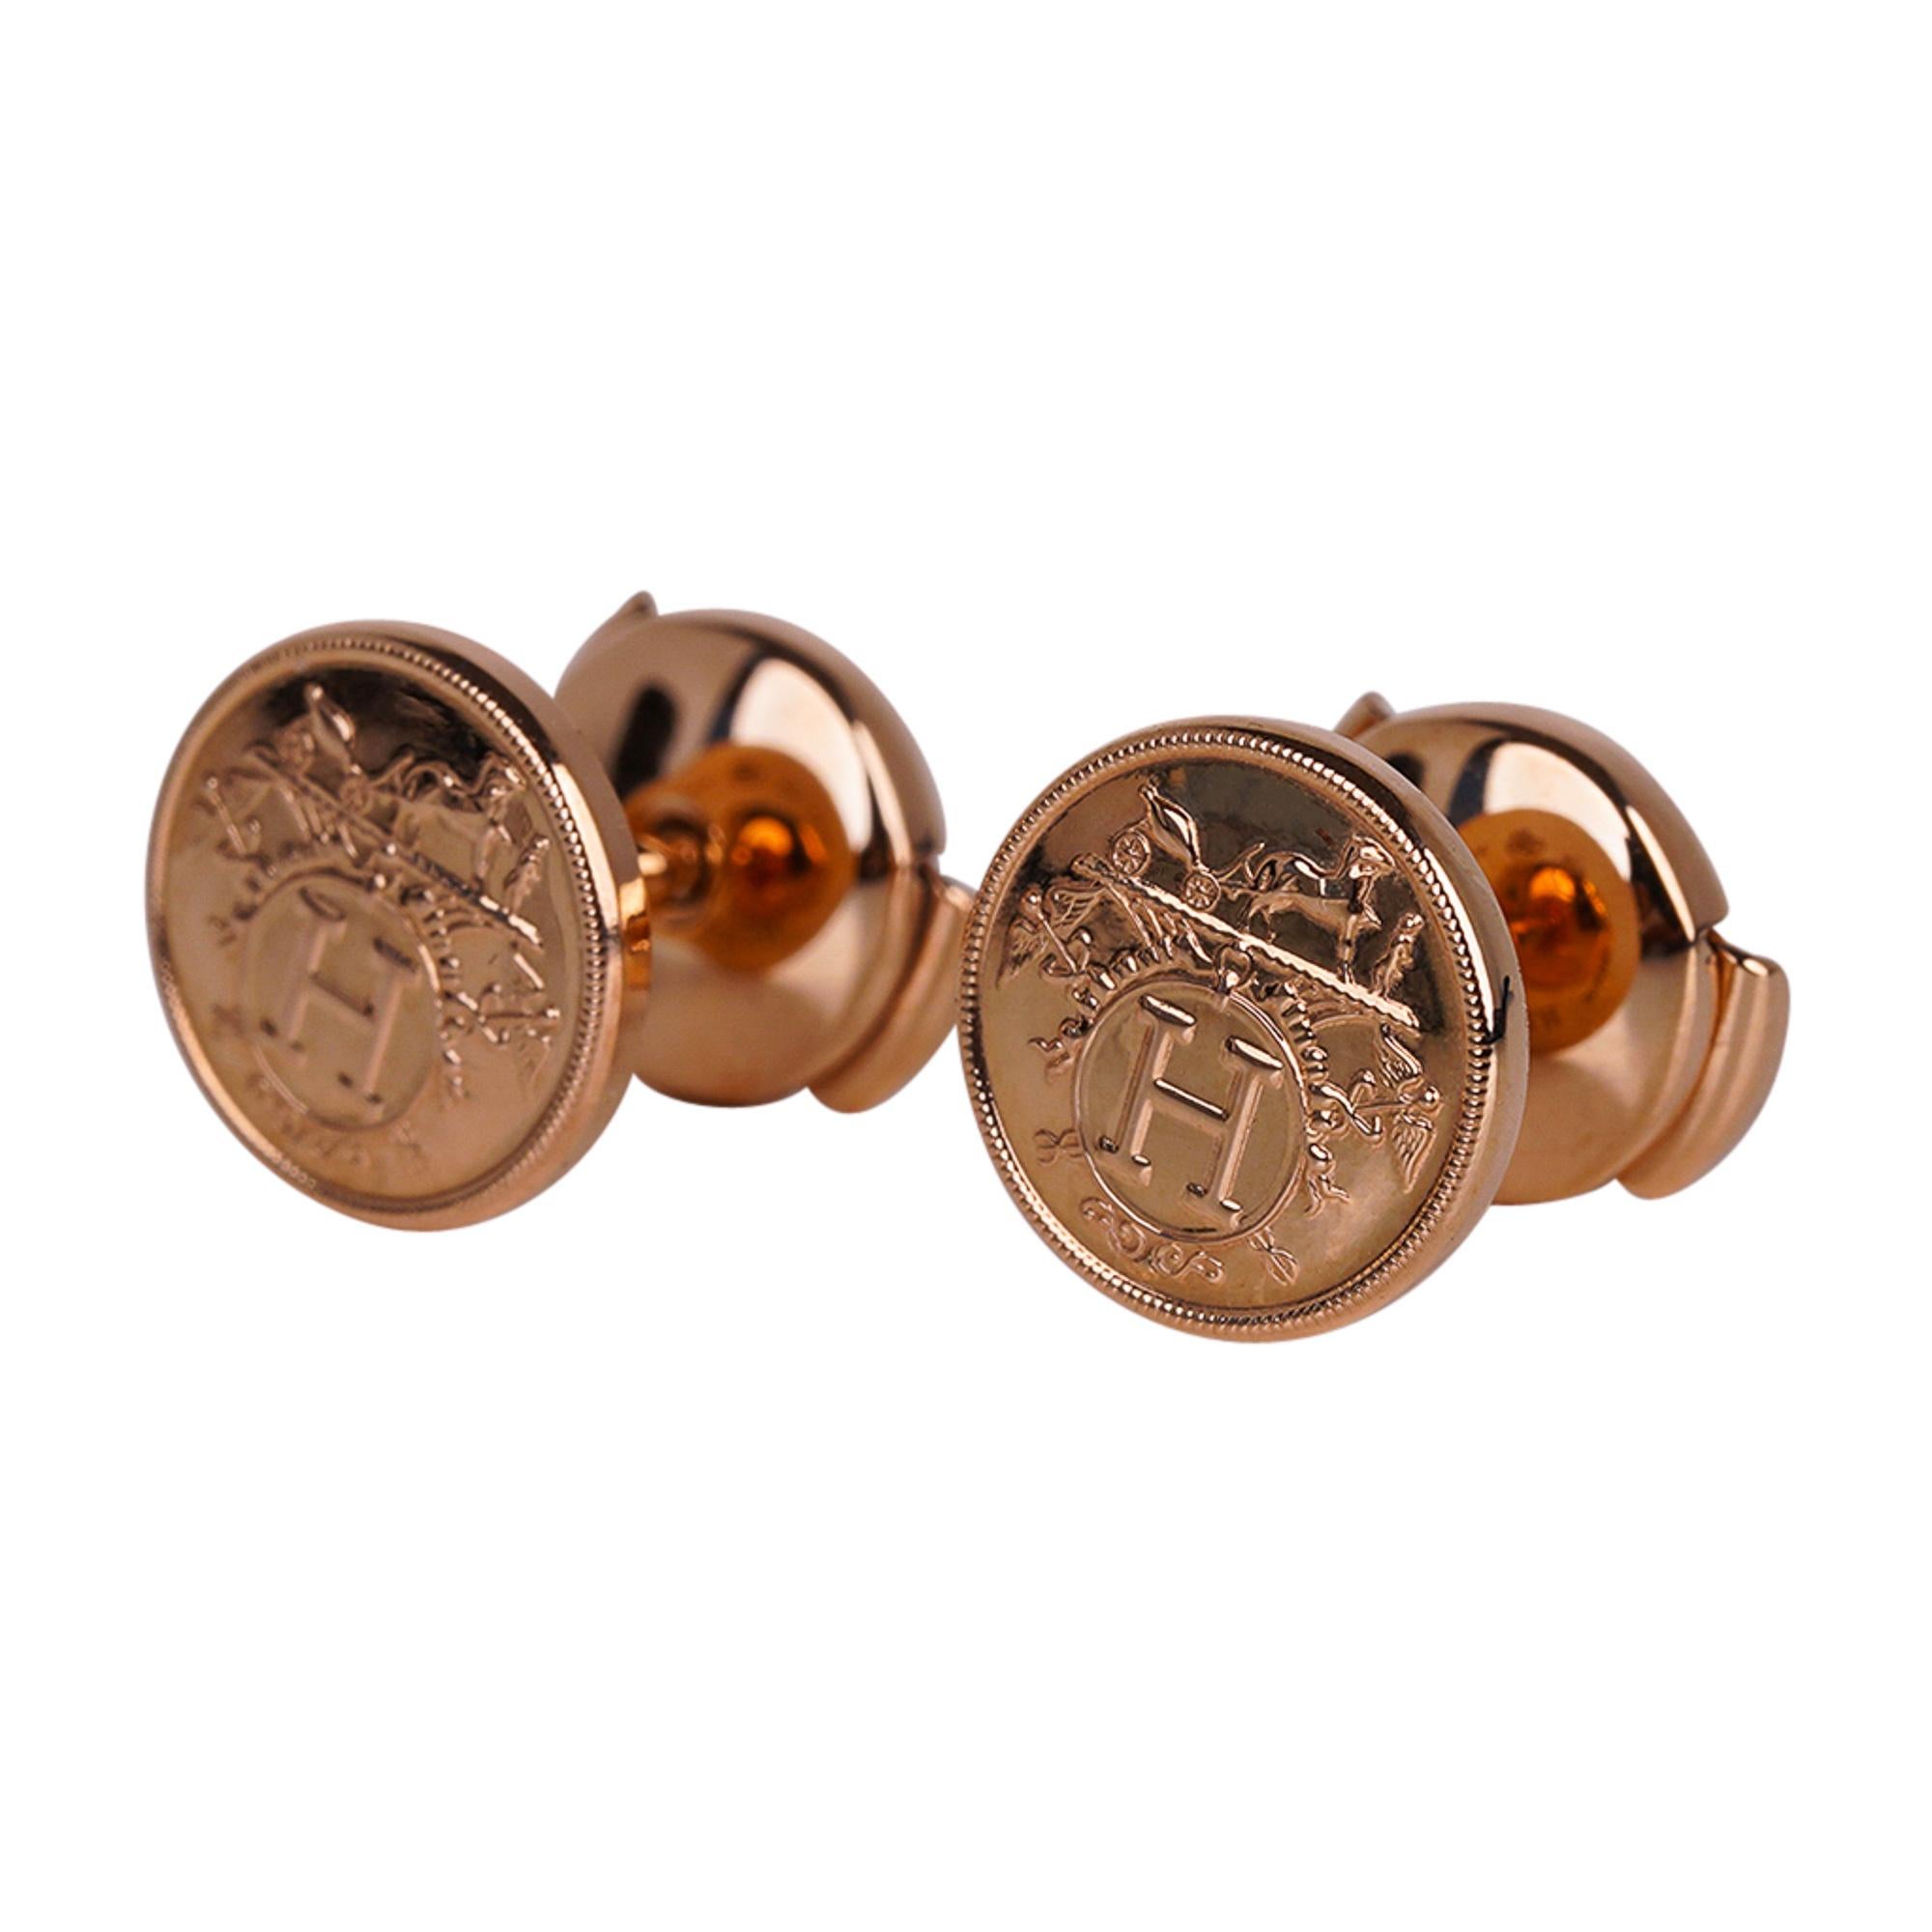 Mightychic offers Hermes Ex Libris 18K Rose Gold TPM Stud Earrings.
Classic Hermes Ex Libris logo.
These limited edition Hermes earrings are timeless.
Also a lovely gifting idea.
Comes with signature Hermes box.
NEW or NEVER WORN.
final sale

SIZE